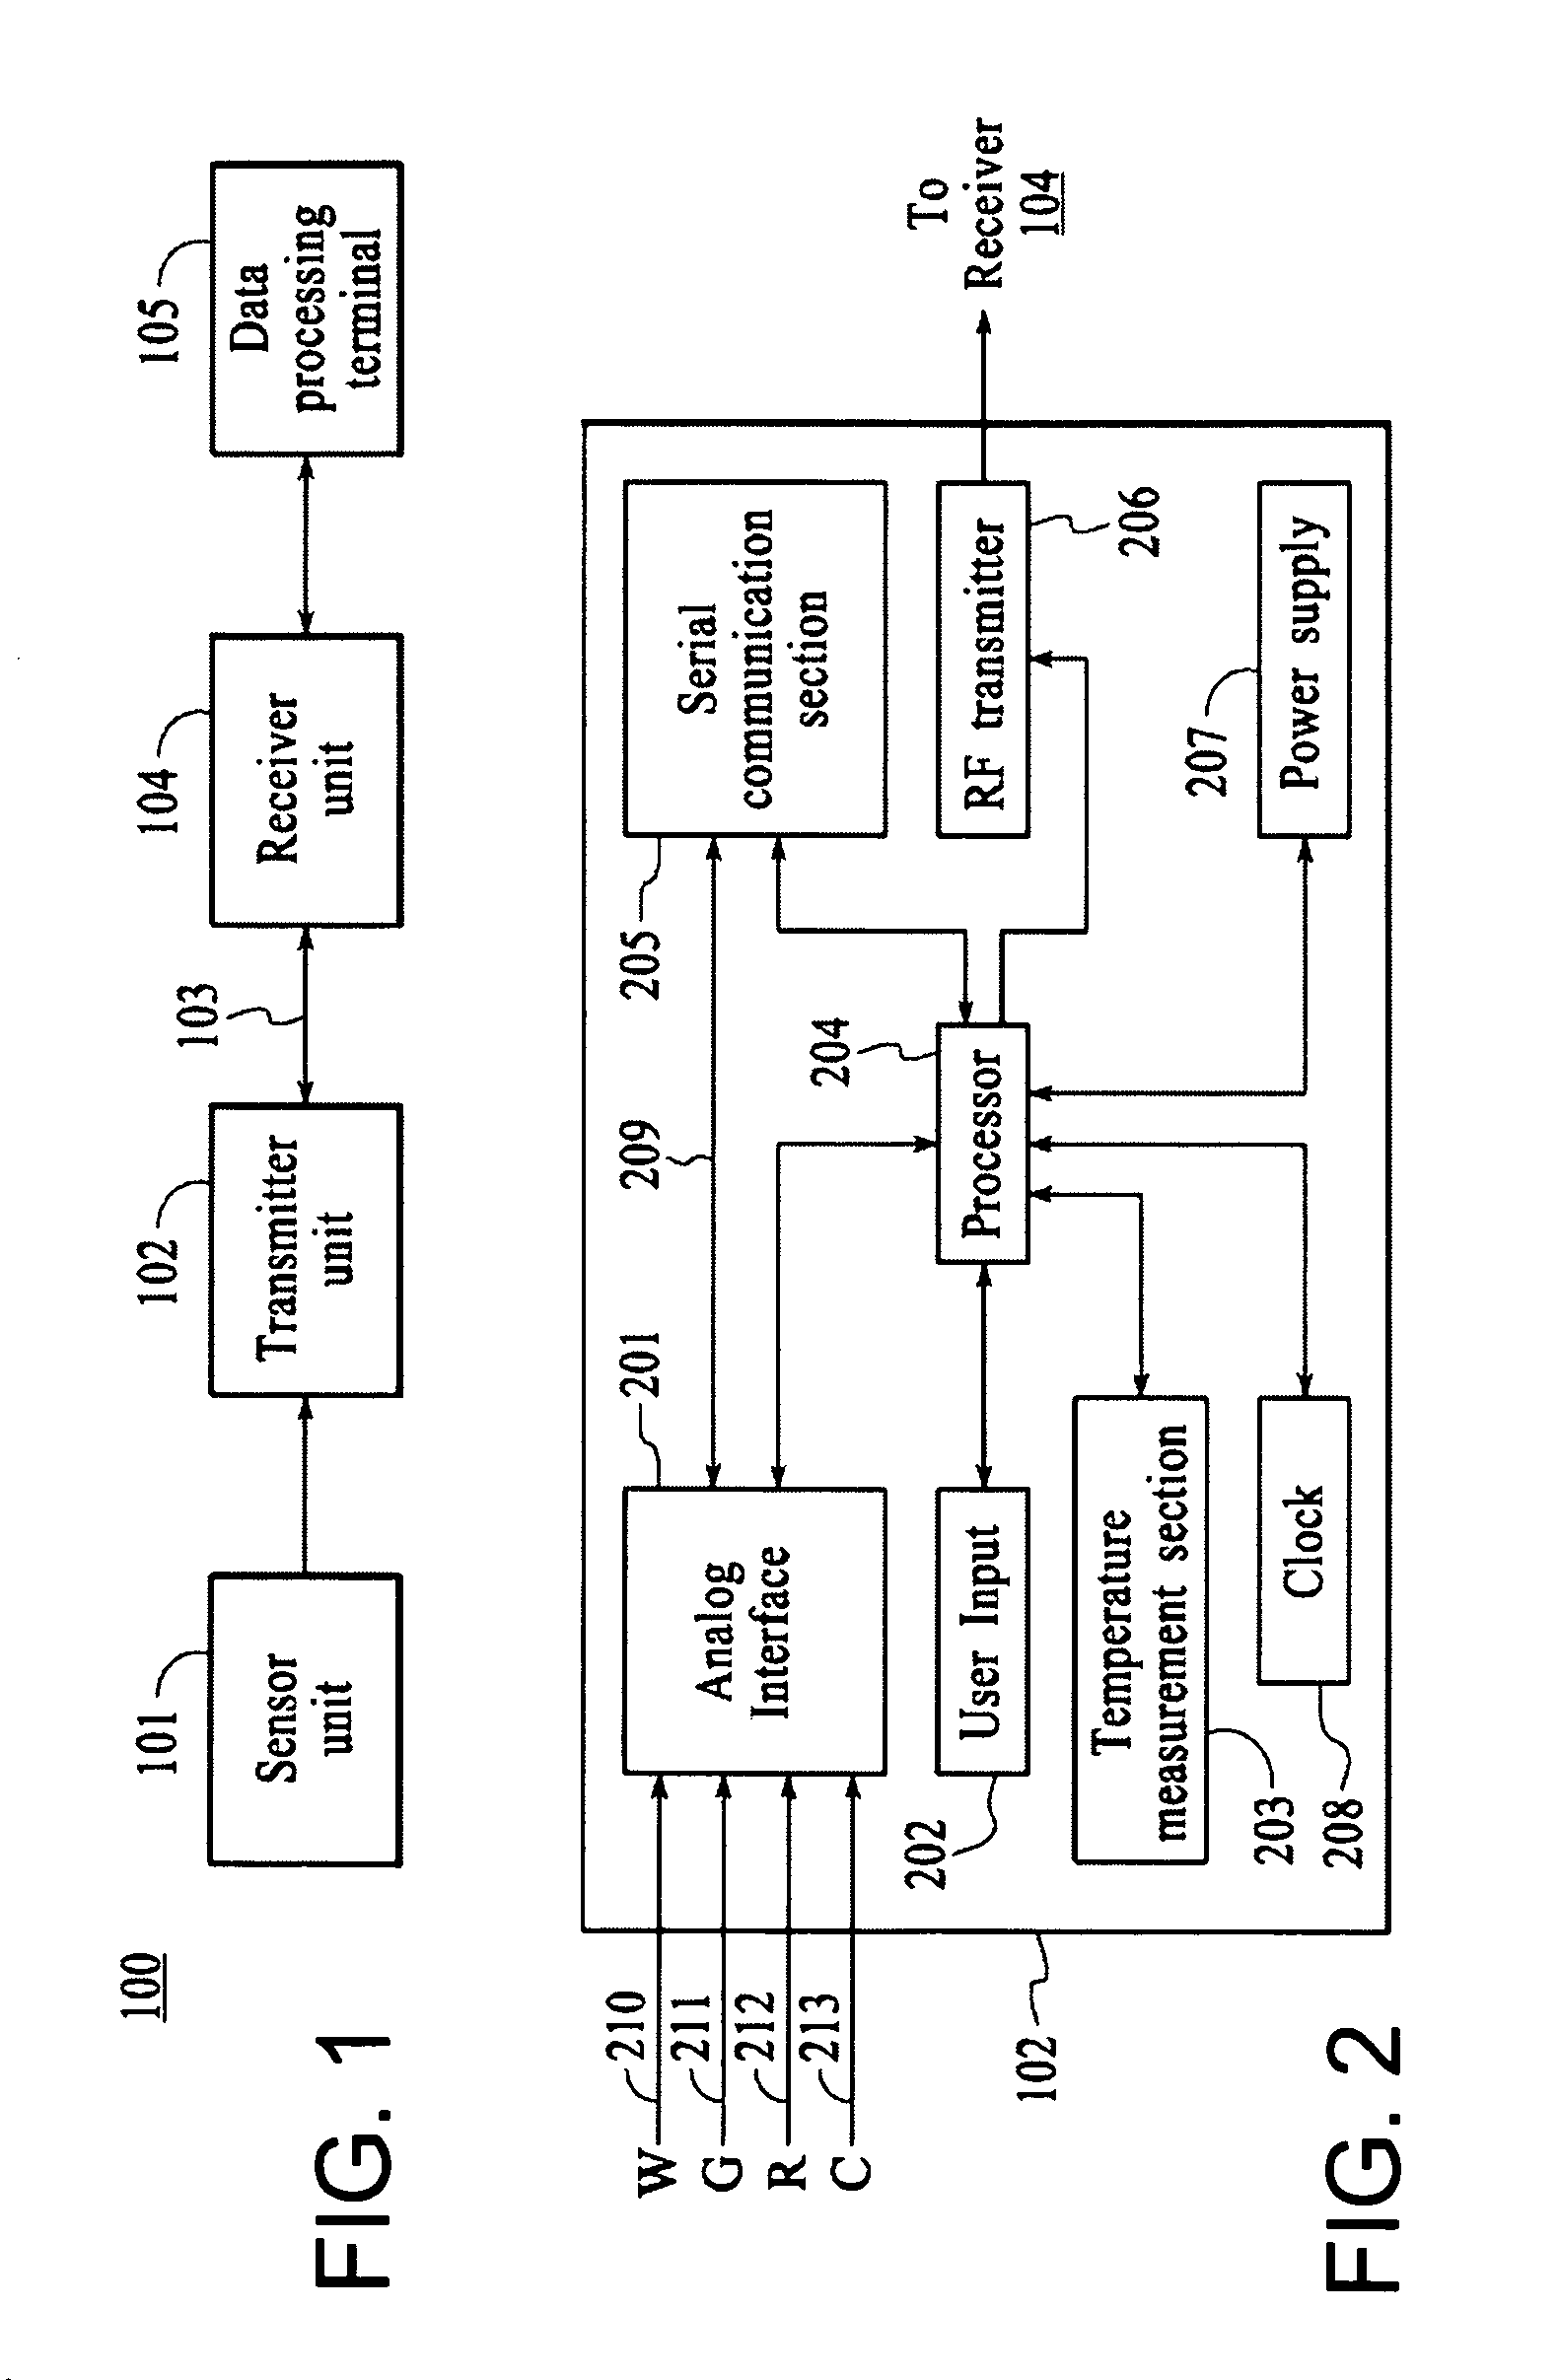 Method and system for providing data management in data monitoring system